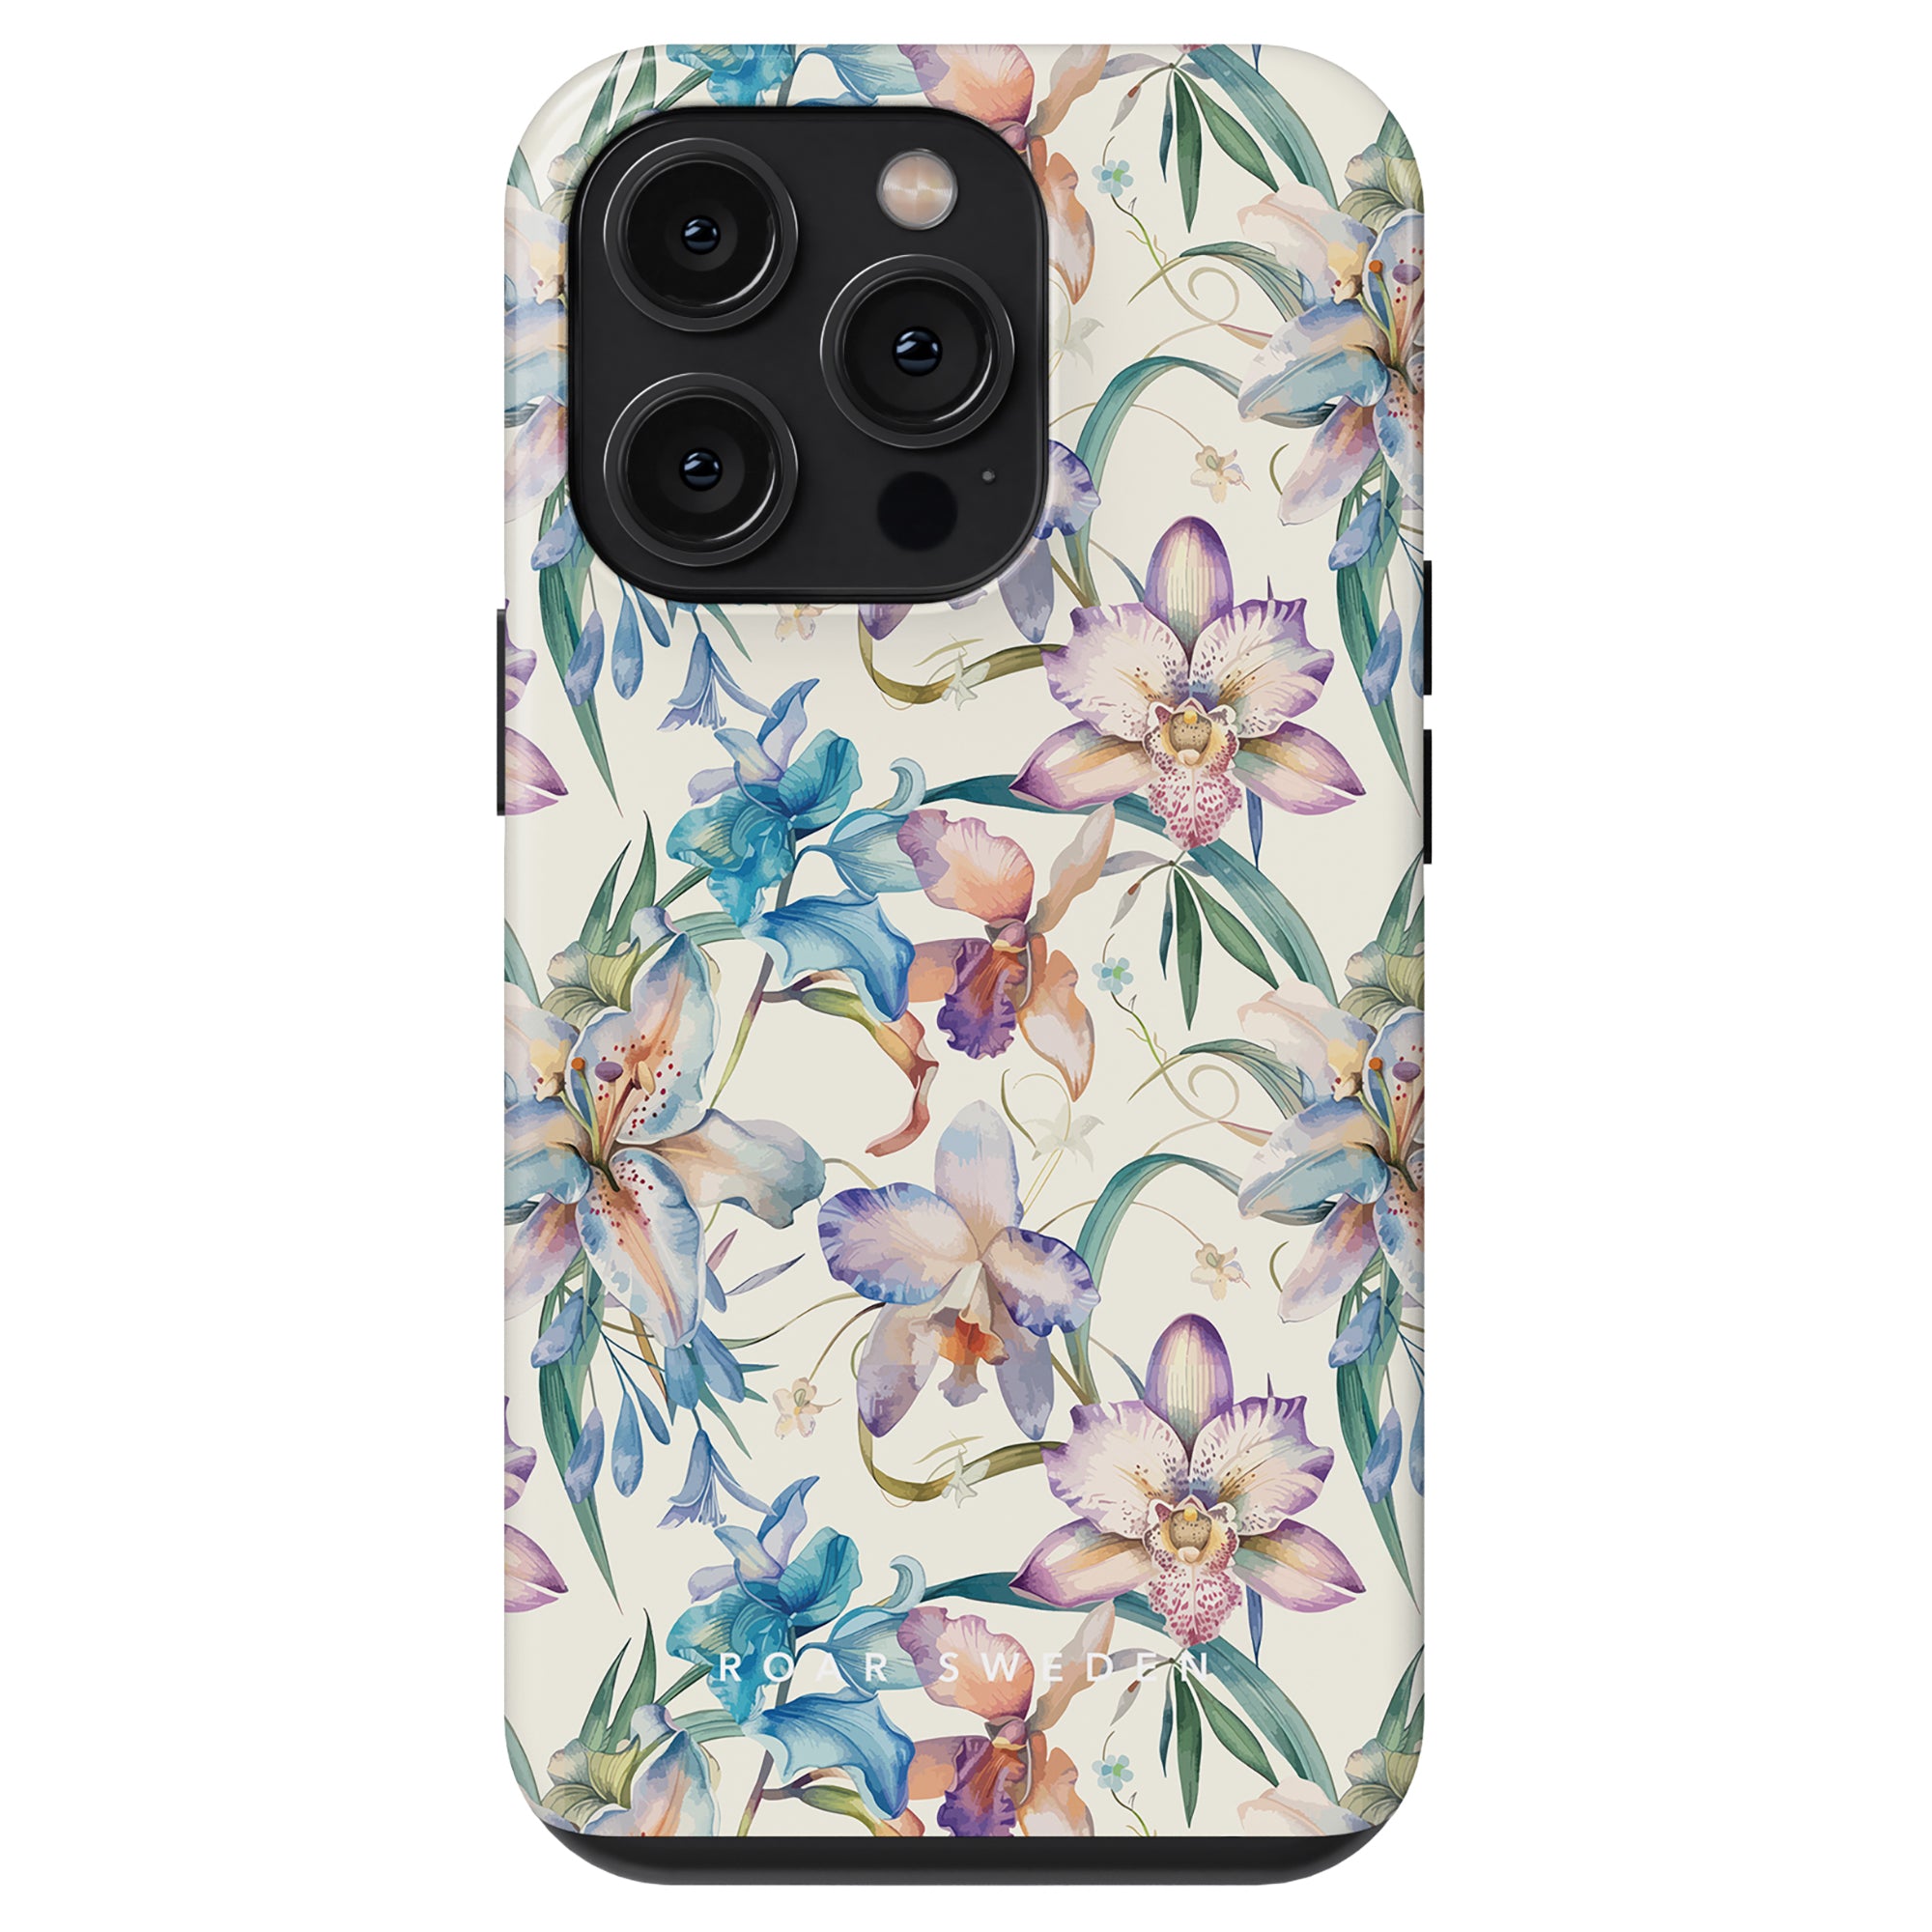 Introducing the Bouquet - Tough Case: a blommiga smartphone-skal with a floral design featuring vibrant lilies on a light background, and three visible rear camera lenses.